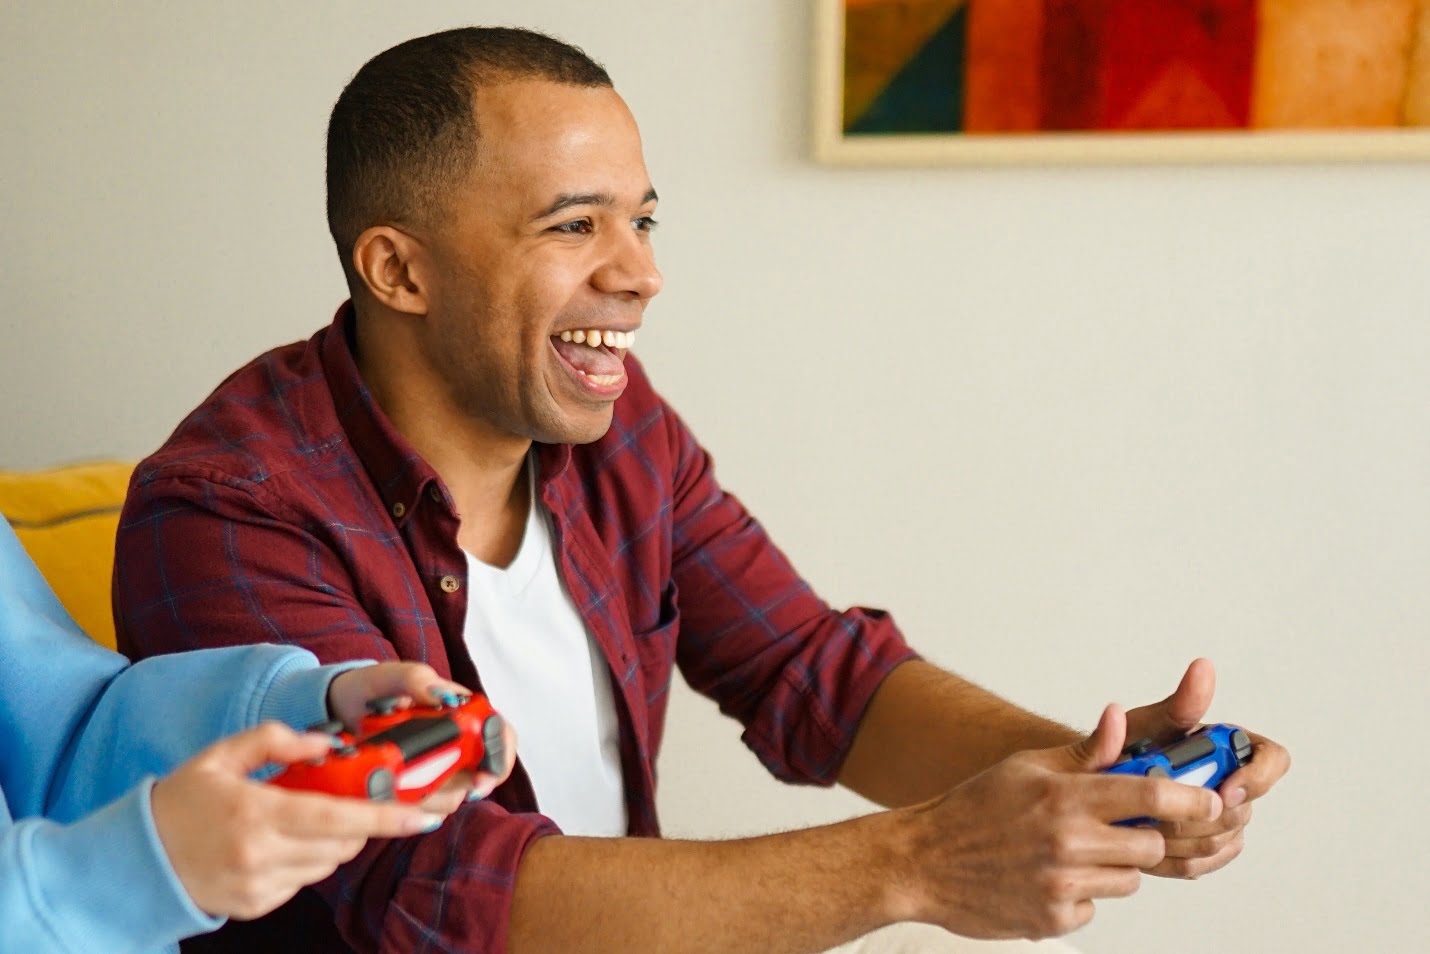 What are the benefits of gaming for adults?